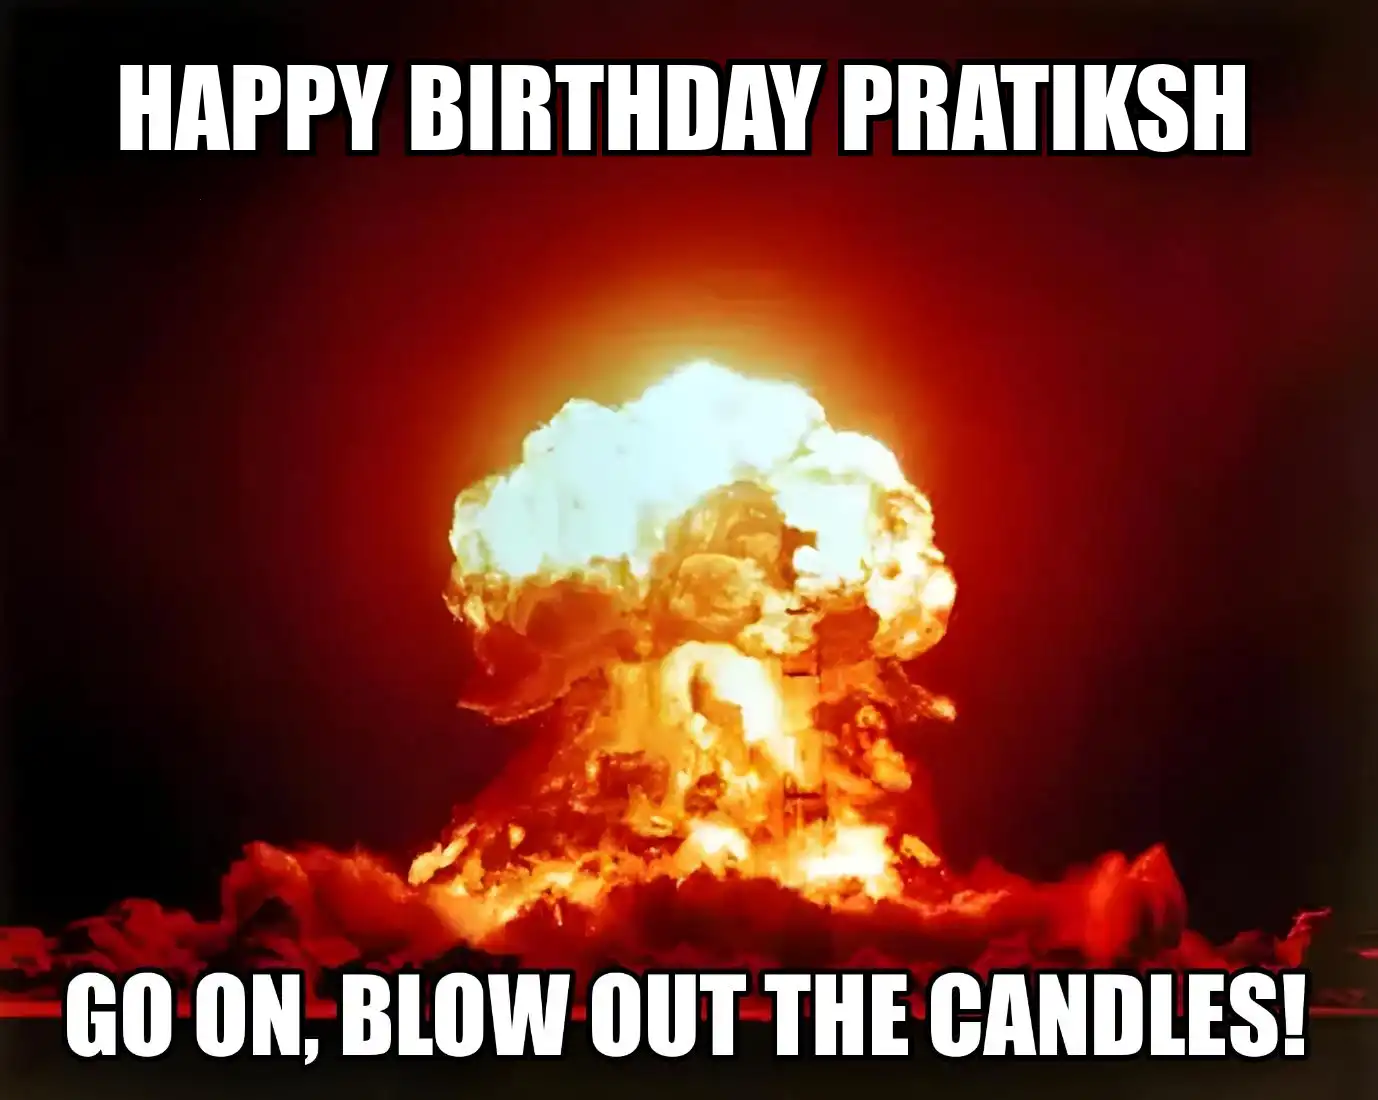 Happy Birthday Pratiksh Go On Blow Out The Candles Meme